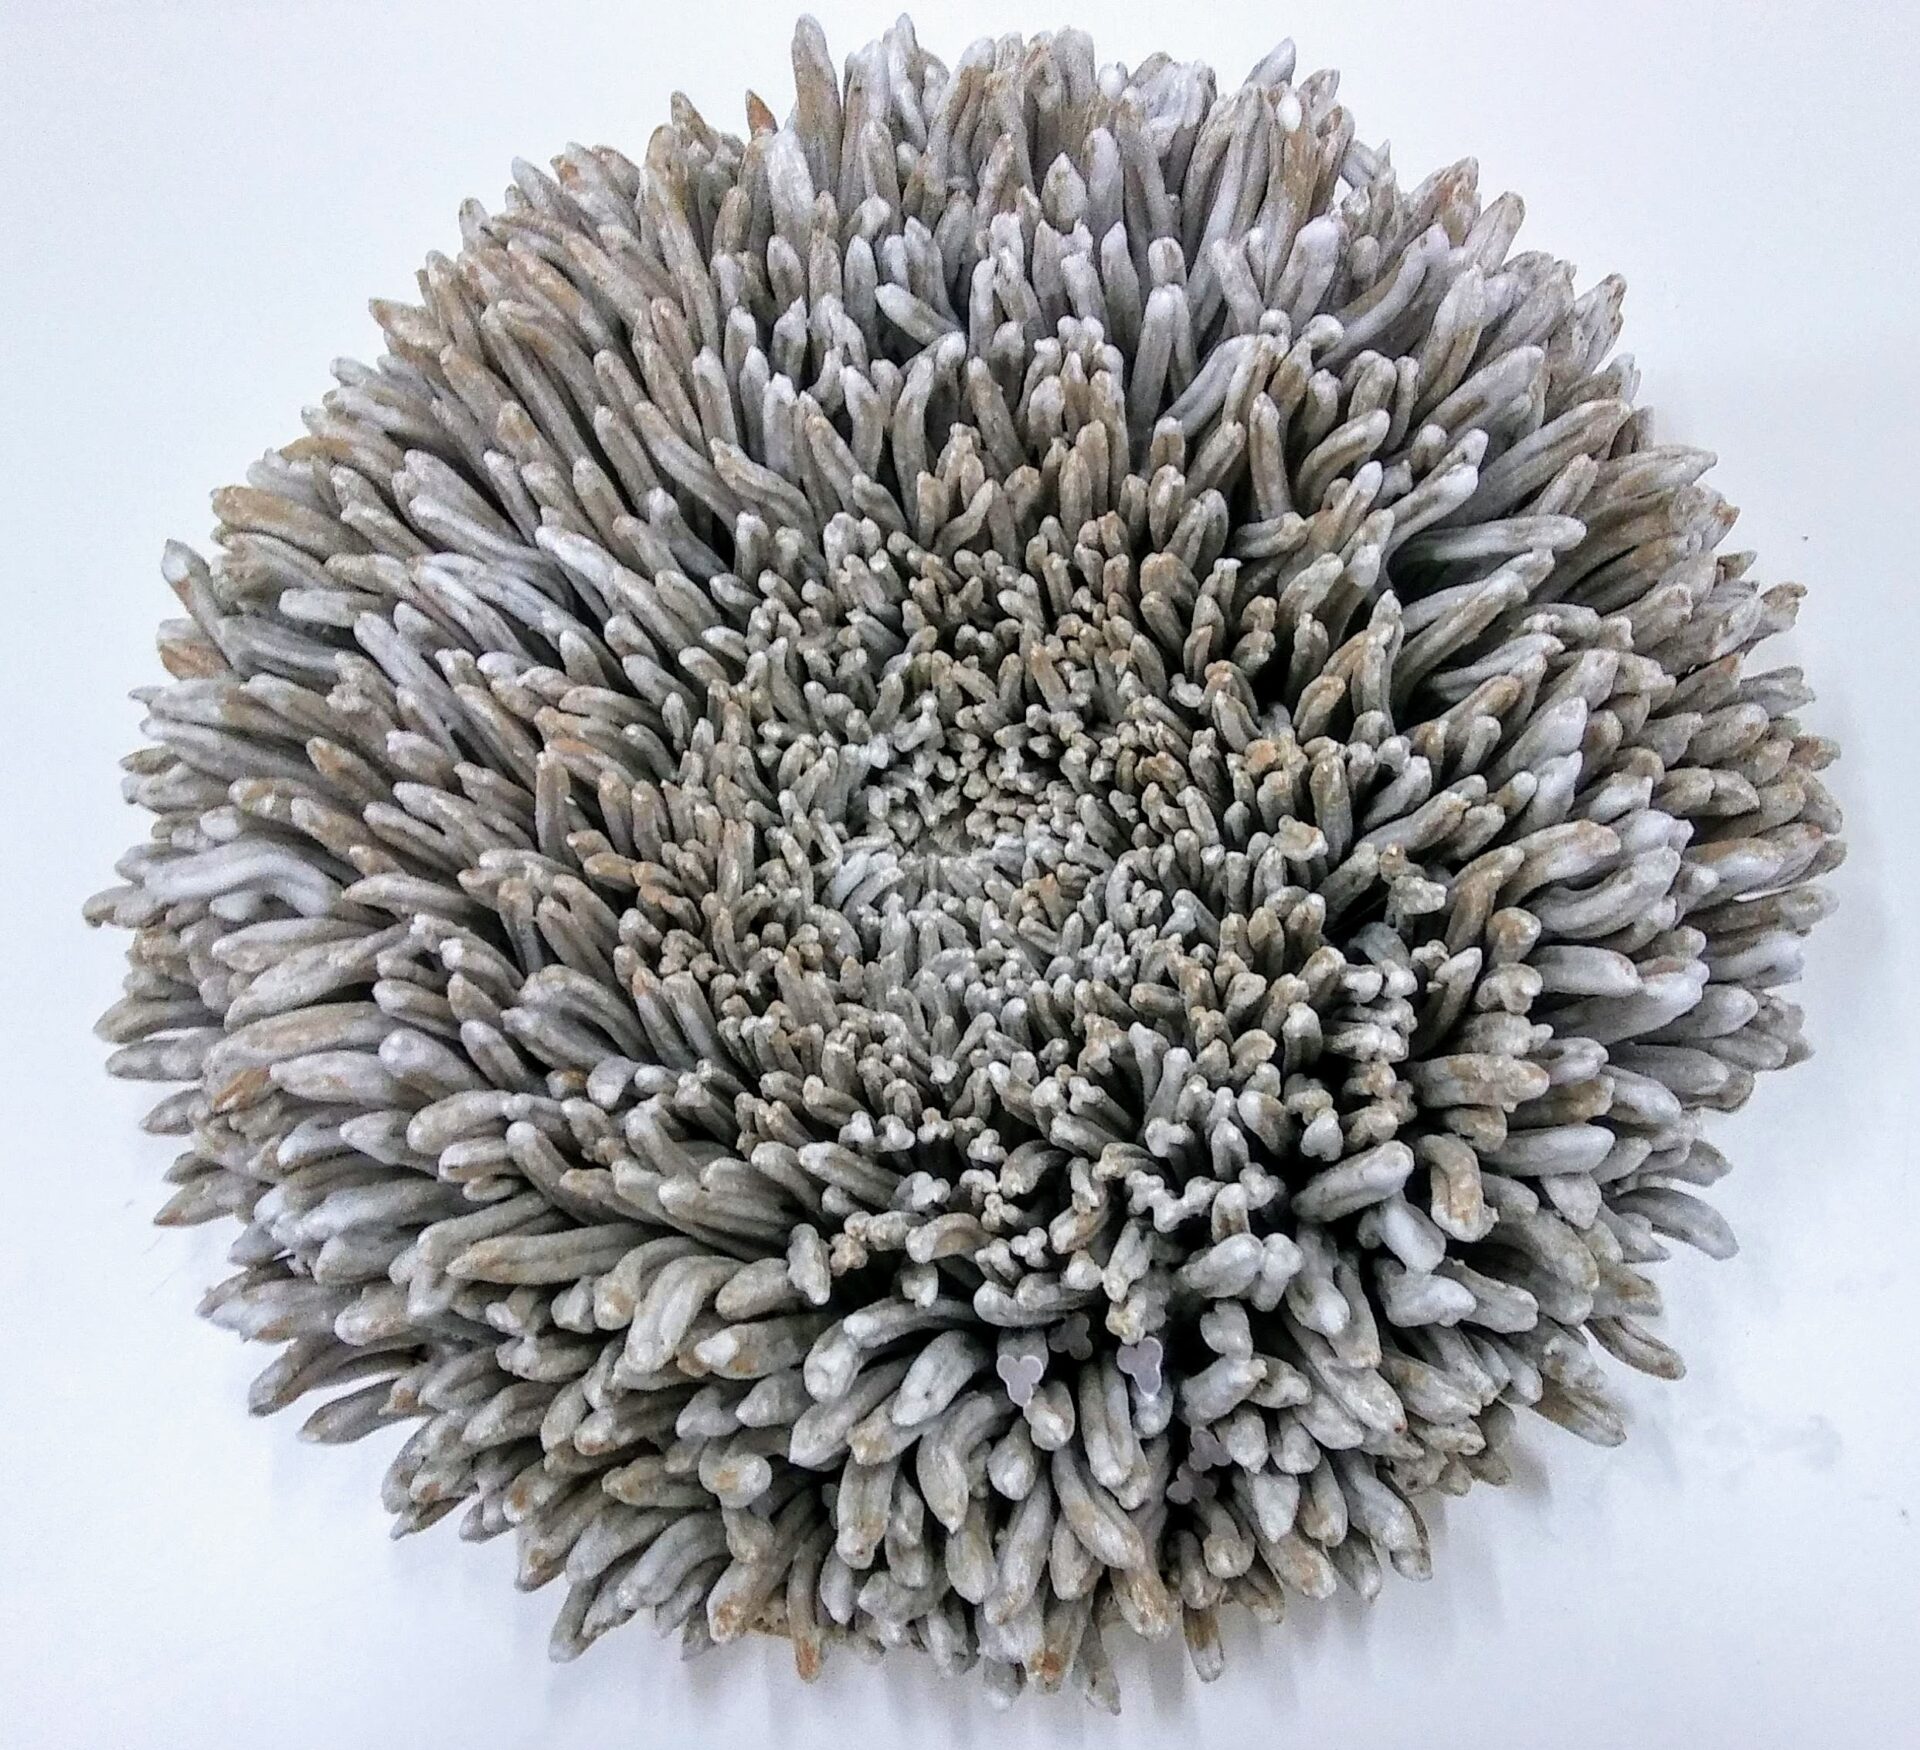 Ceramic art sculpture in the shape of an organic plant or flower